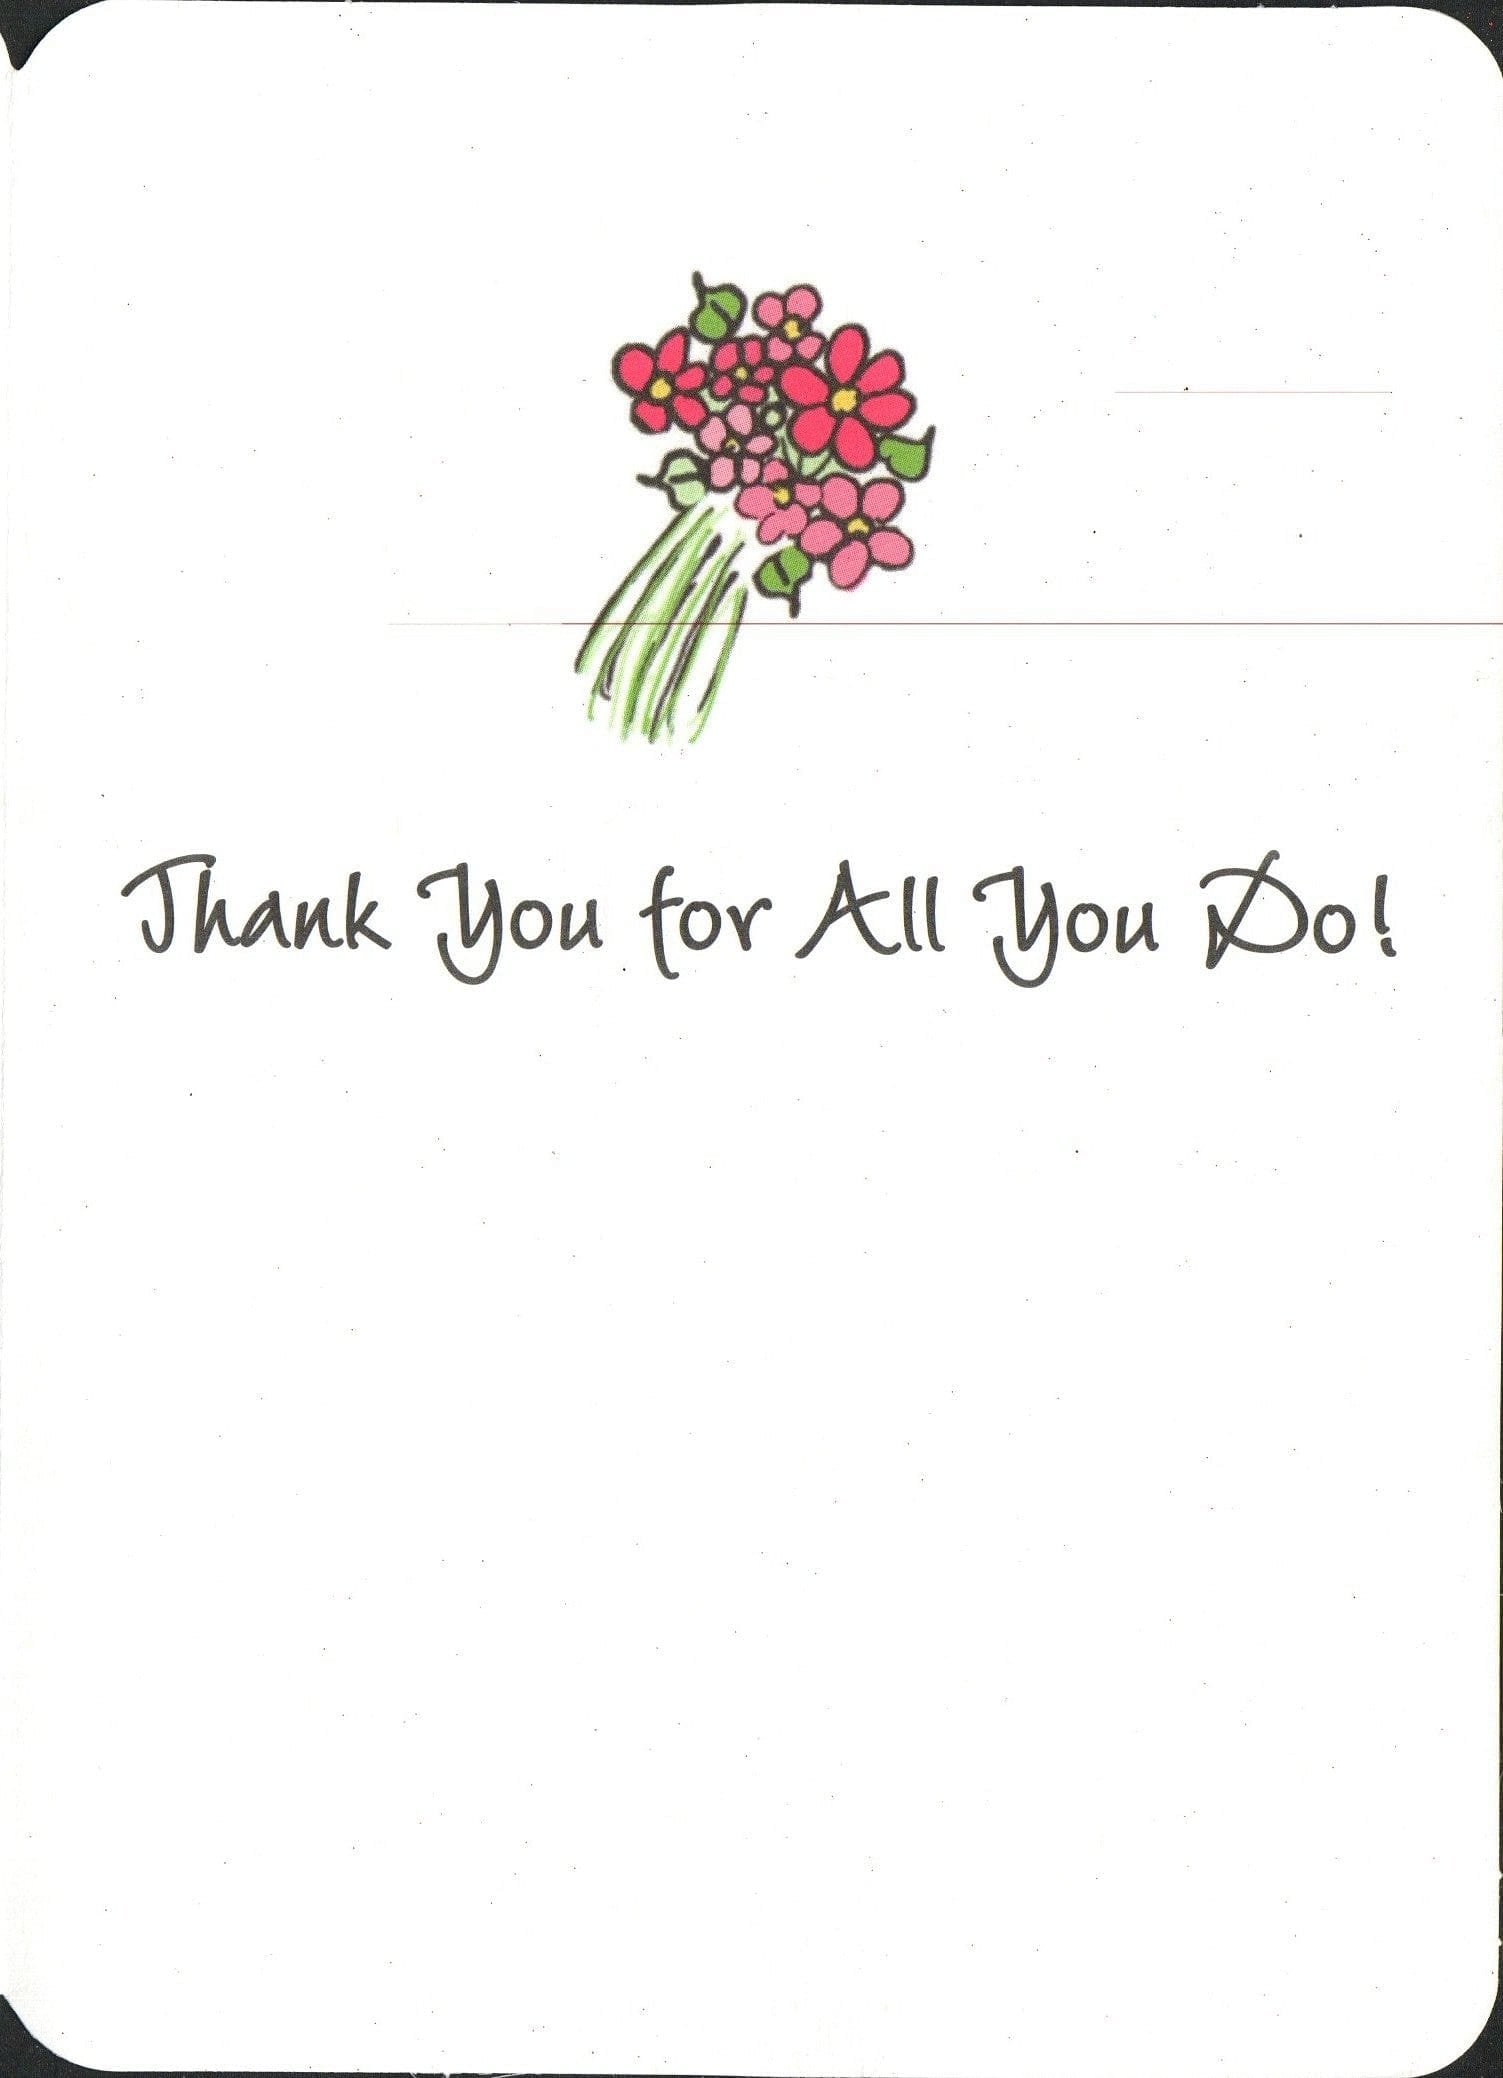 File Juggling Administrative Assistant's Day Card - Shelburne Country Store